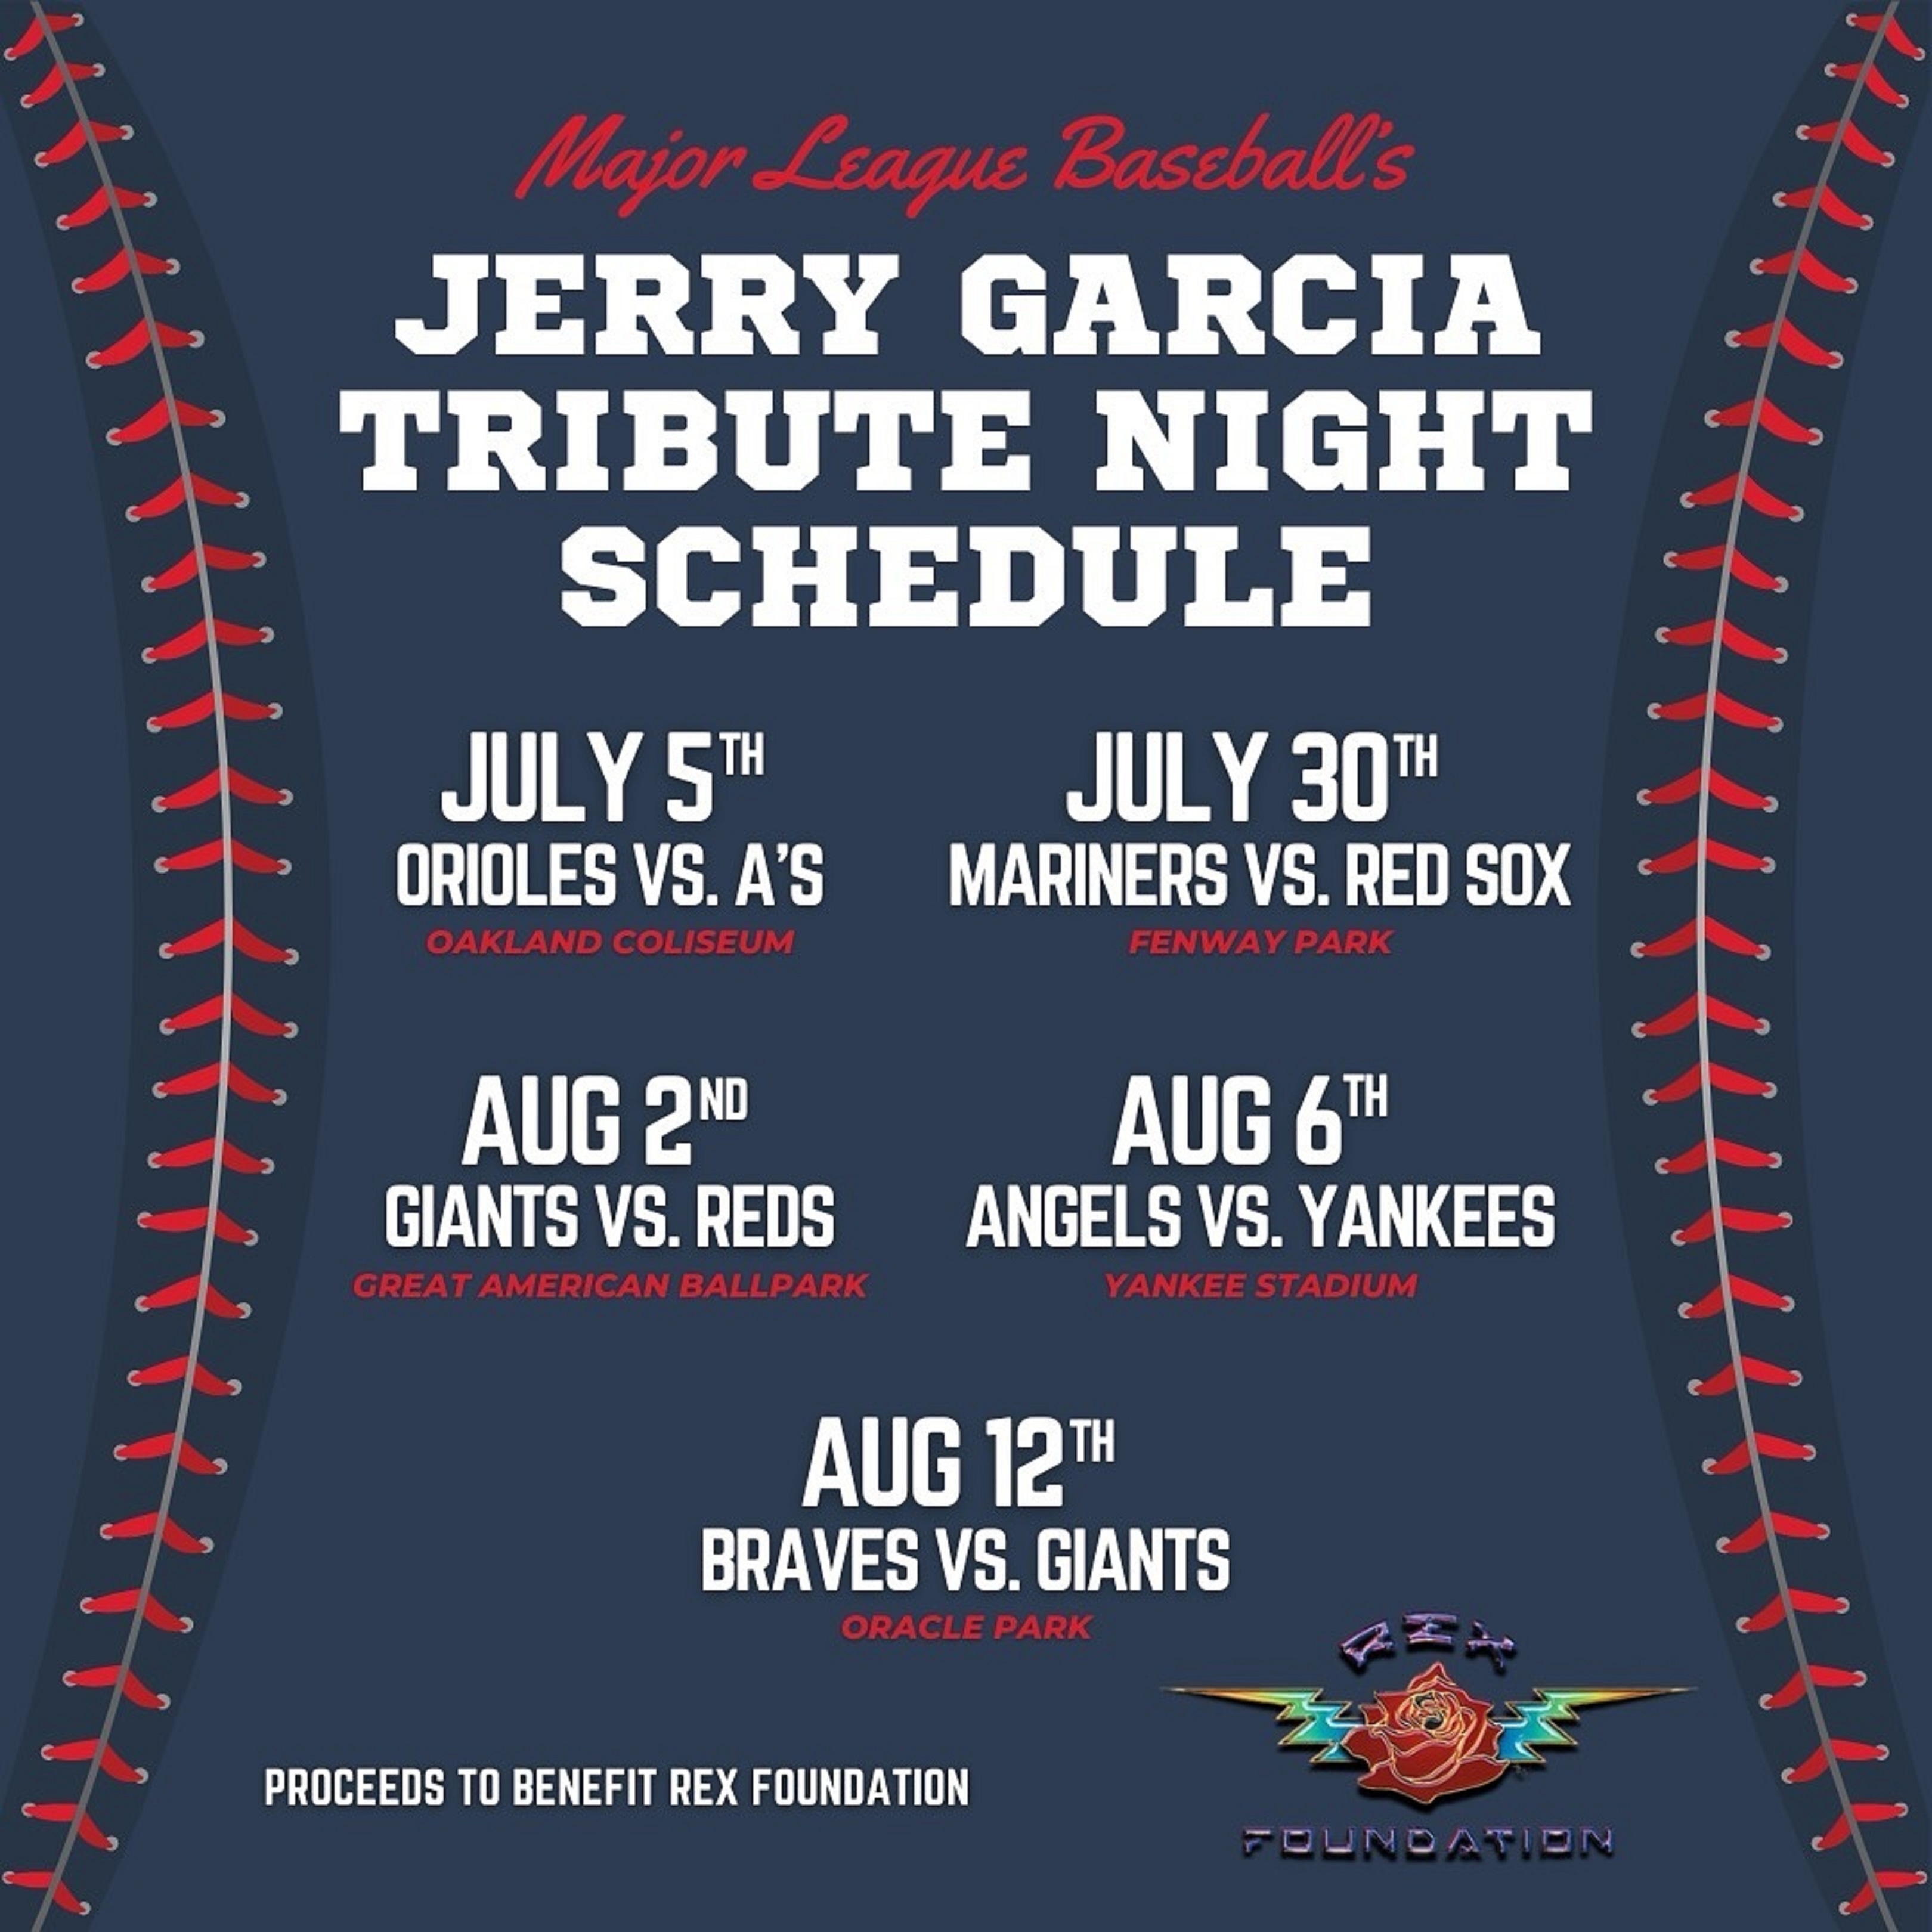 Jerry Garcia Tribute Nights at America’s Ballparks: A Celebration of Music and Baseball